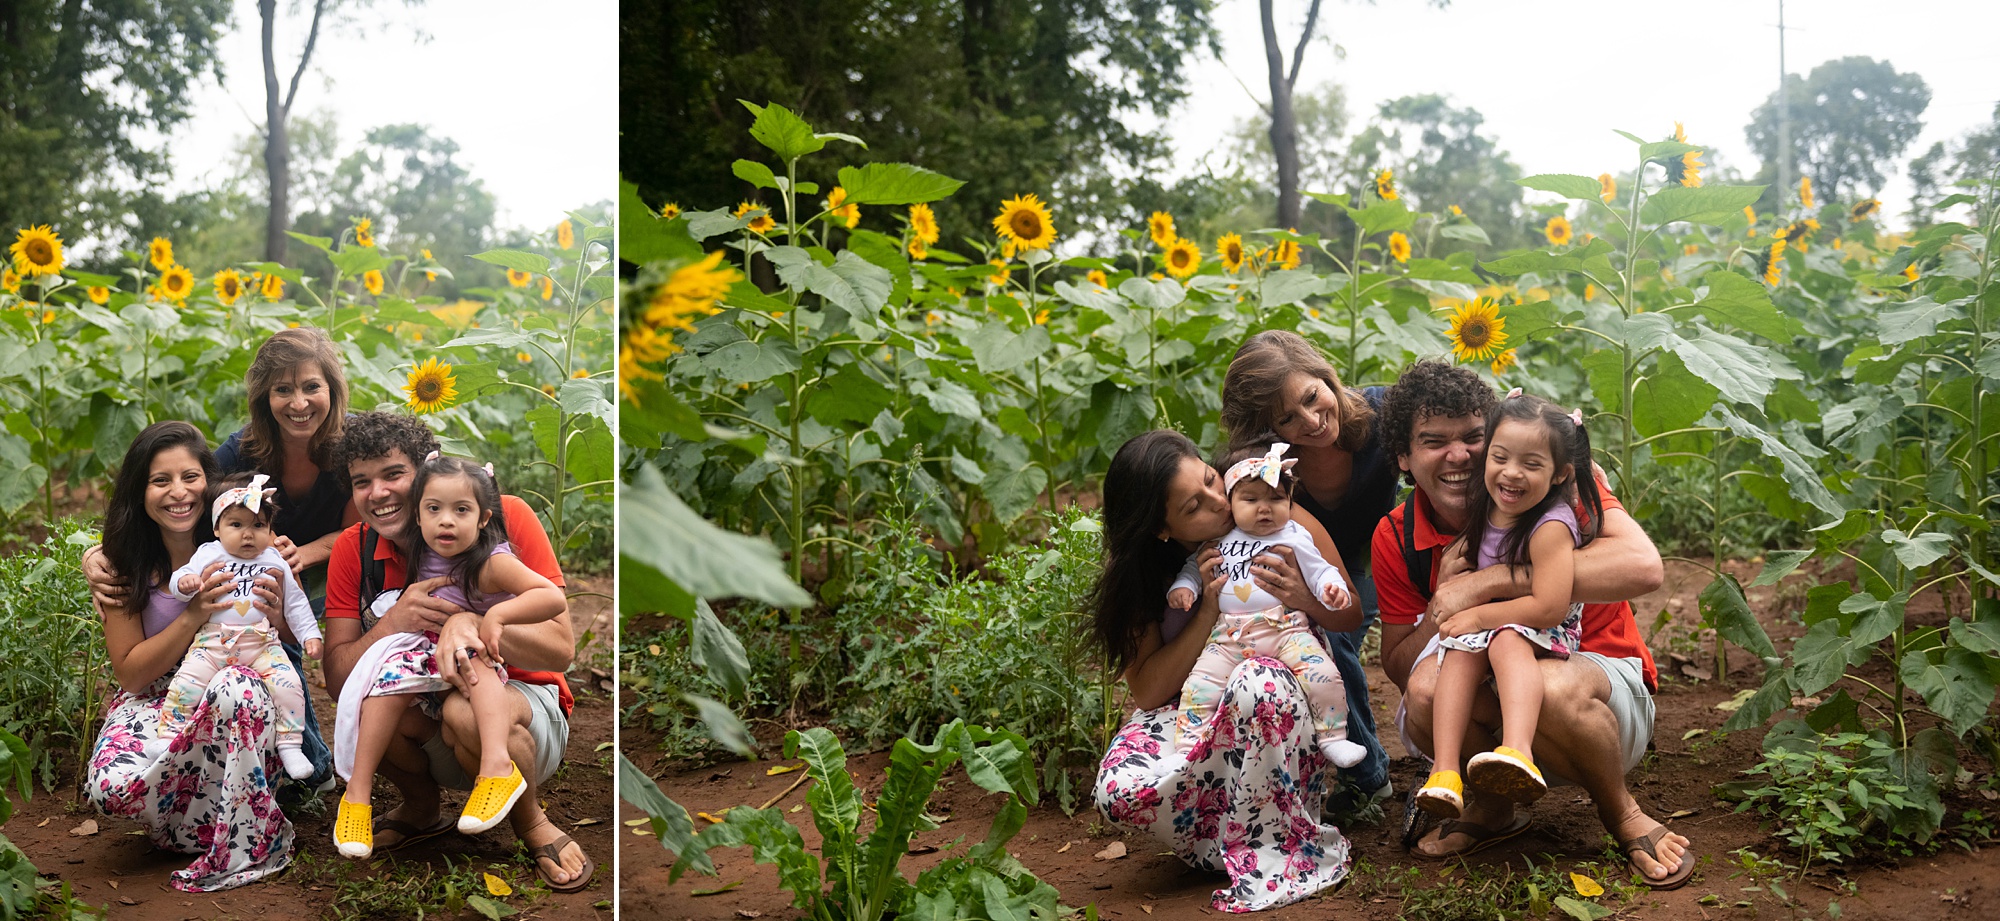 Sunflower Photo Session with family of four and grandmother